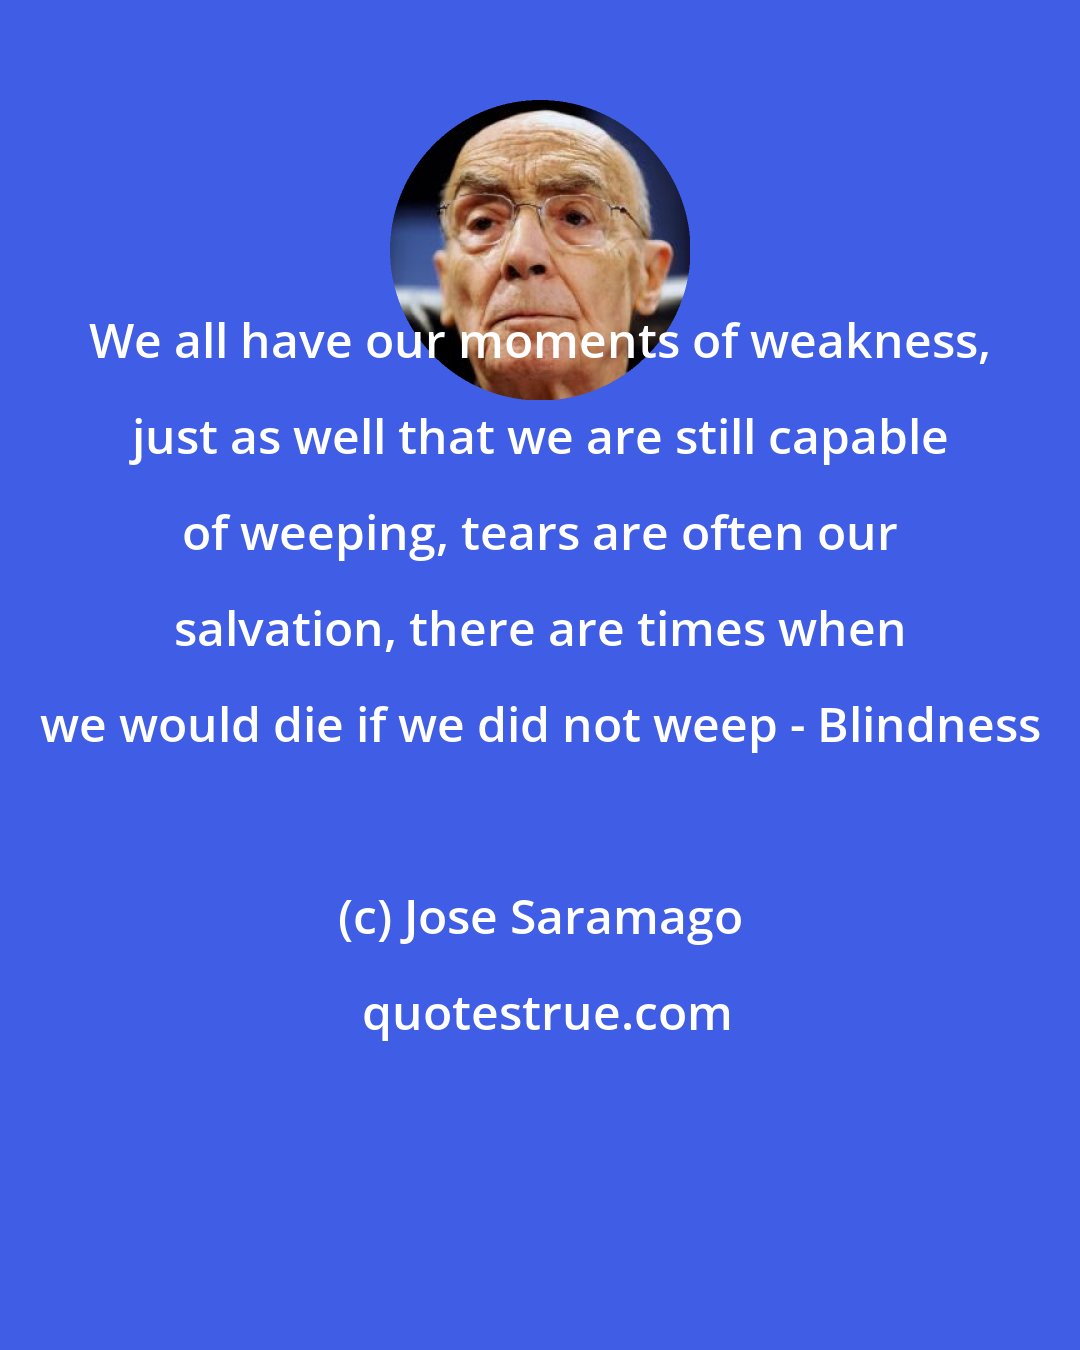 Jose Saramago: We all have our moments of weakness, just as well that we are still capable of weeping, tears are often our salvation, there are times when we would die if we did not weep - Blindness